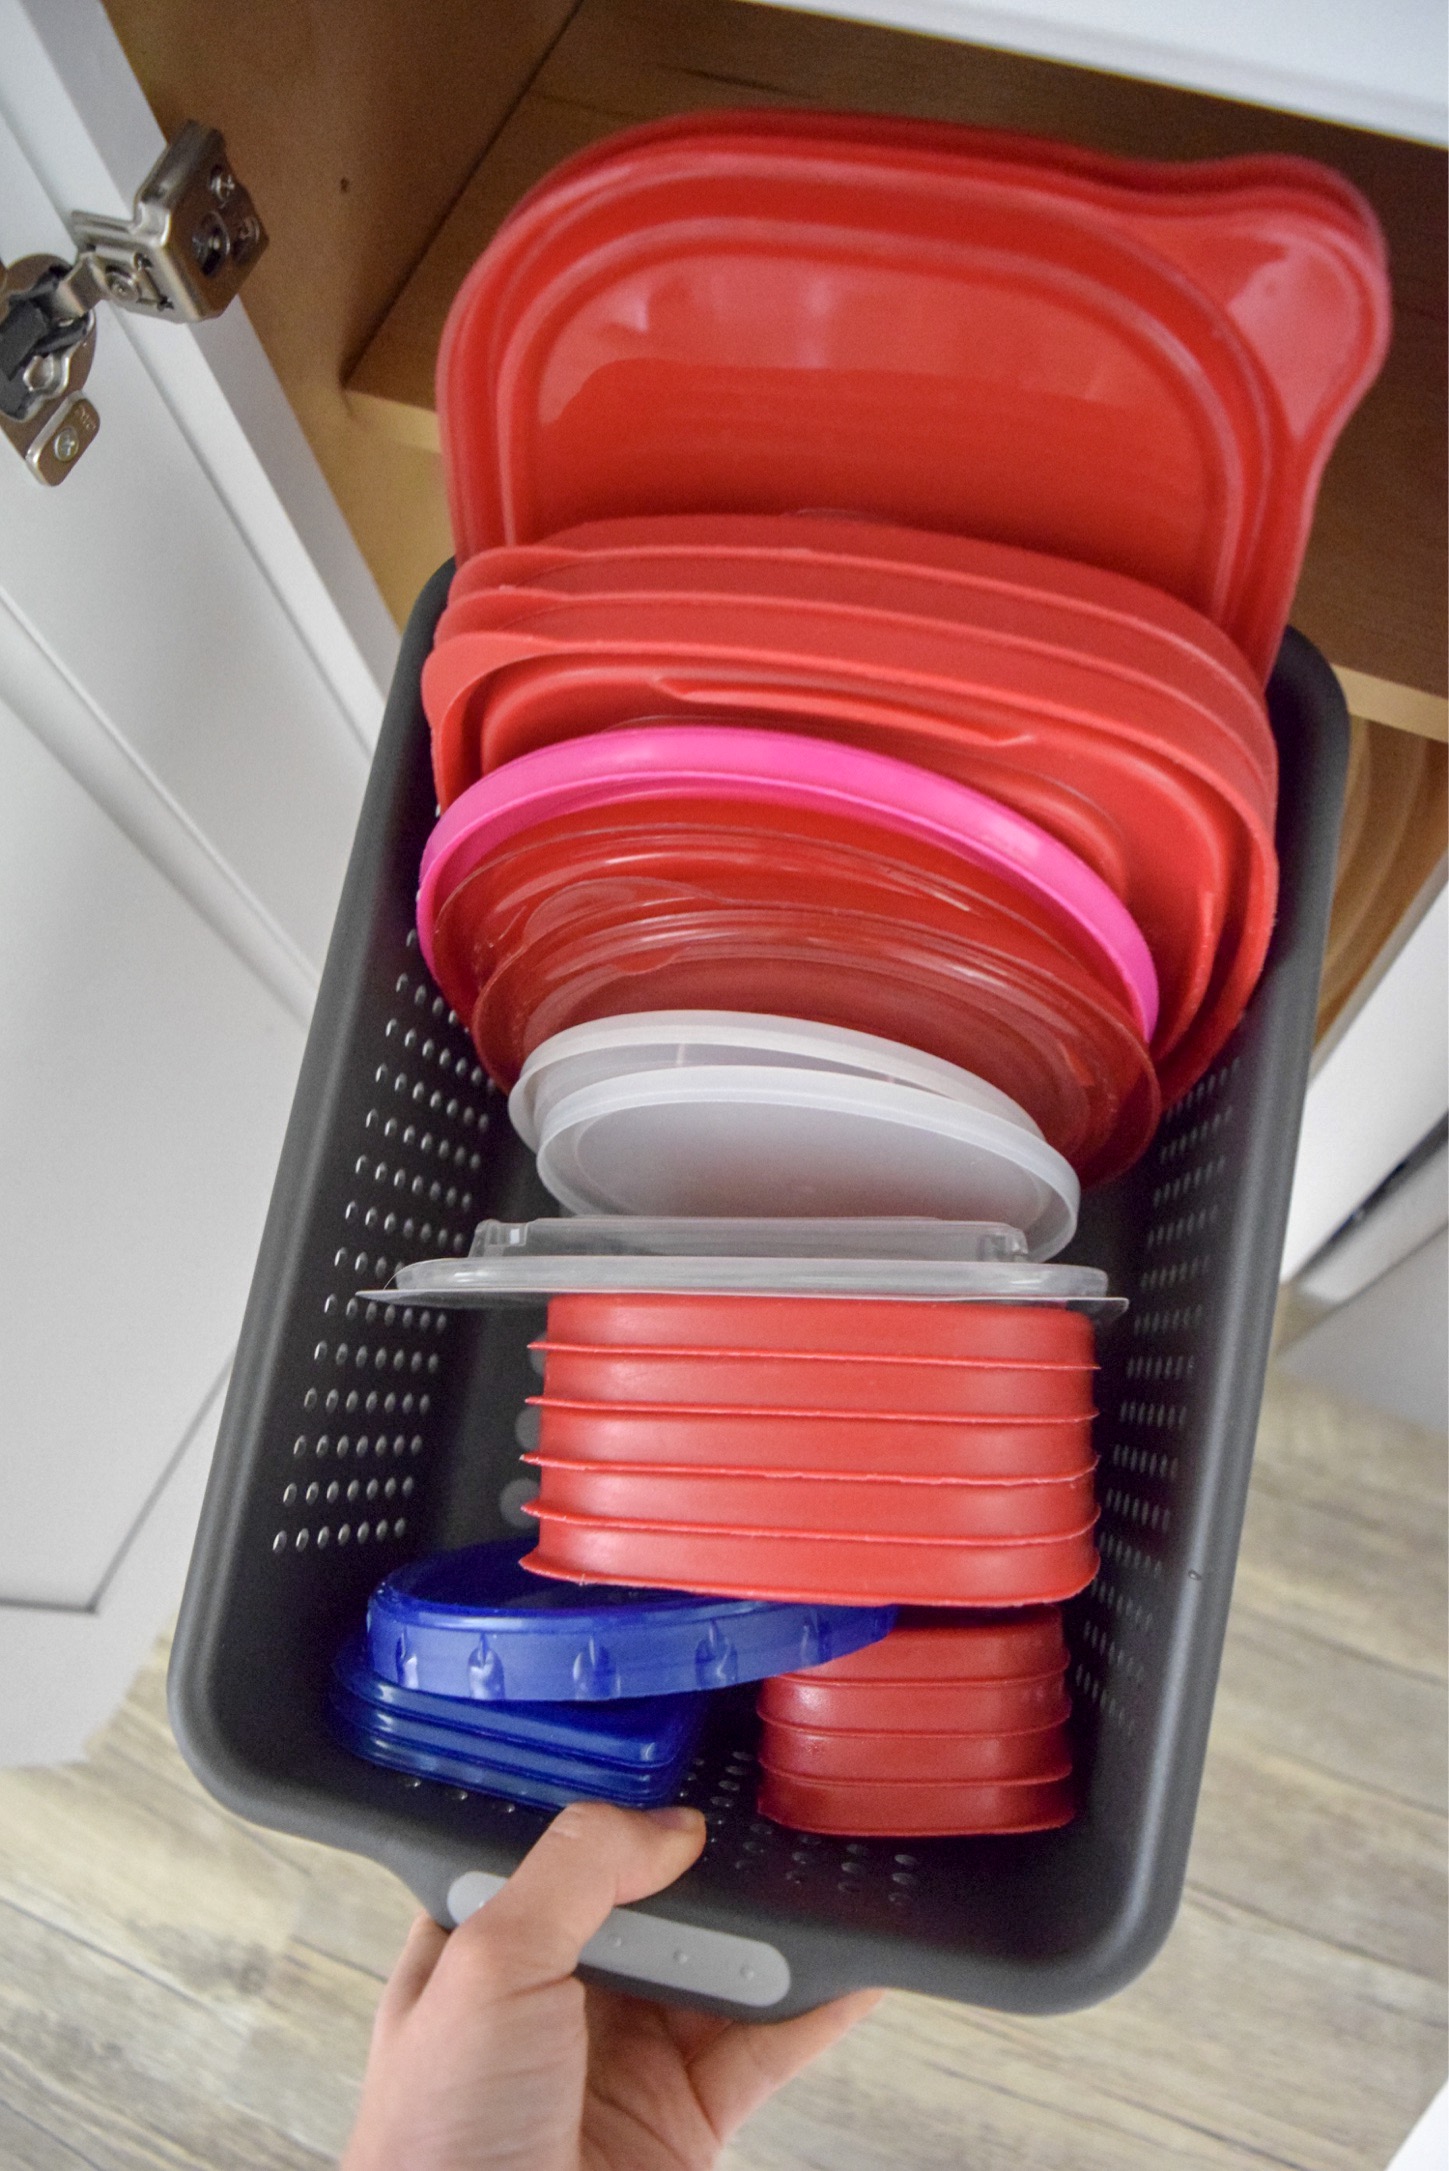 Easy Way to Organize Tupperware in Cabinets